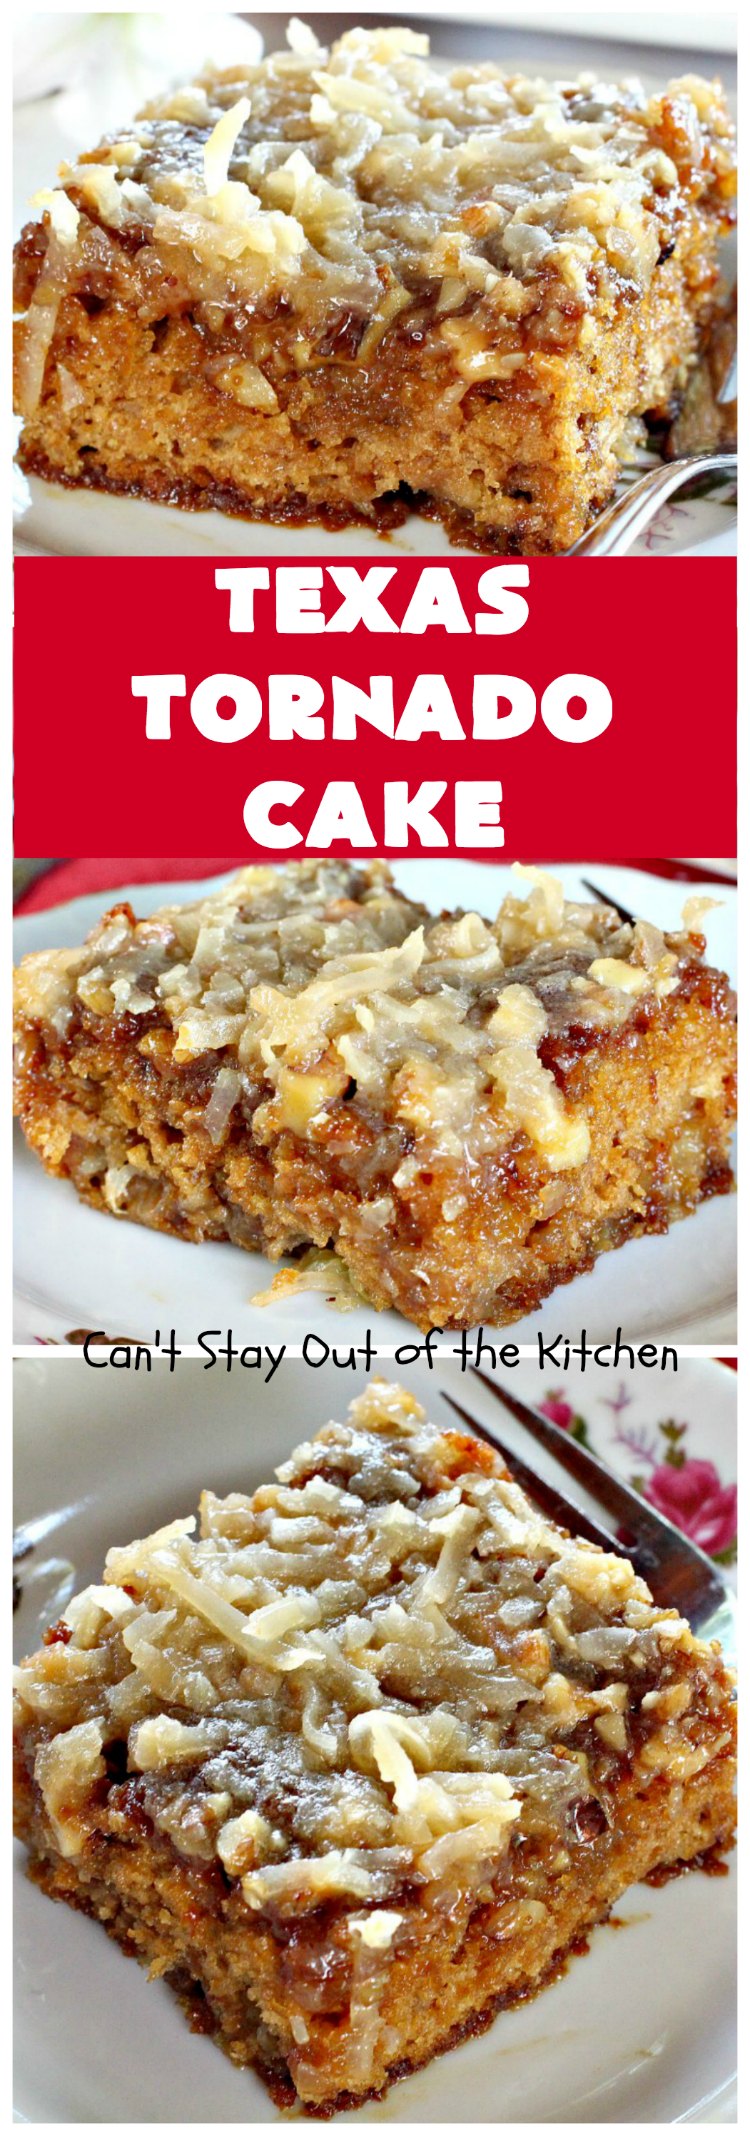 Texas Tornado Cake | Can't Stay Out of the Kitchen